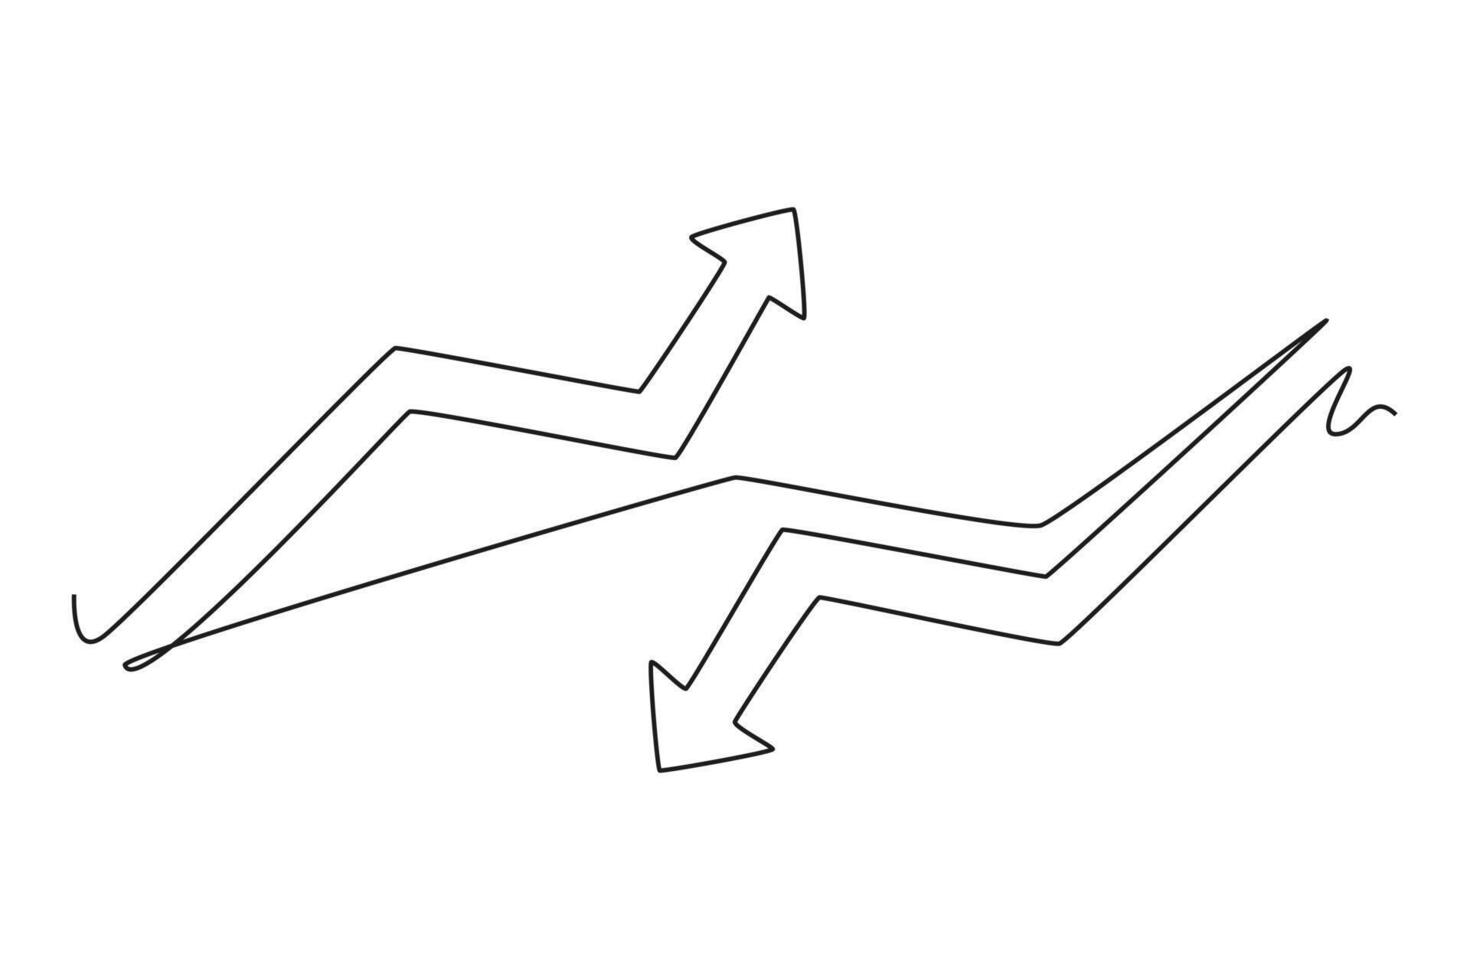 One continuous line drawing of arrow concept. Doodle vector illustration in simple linear style.